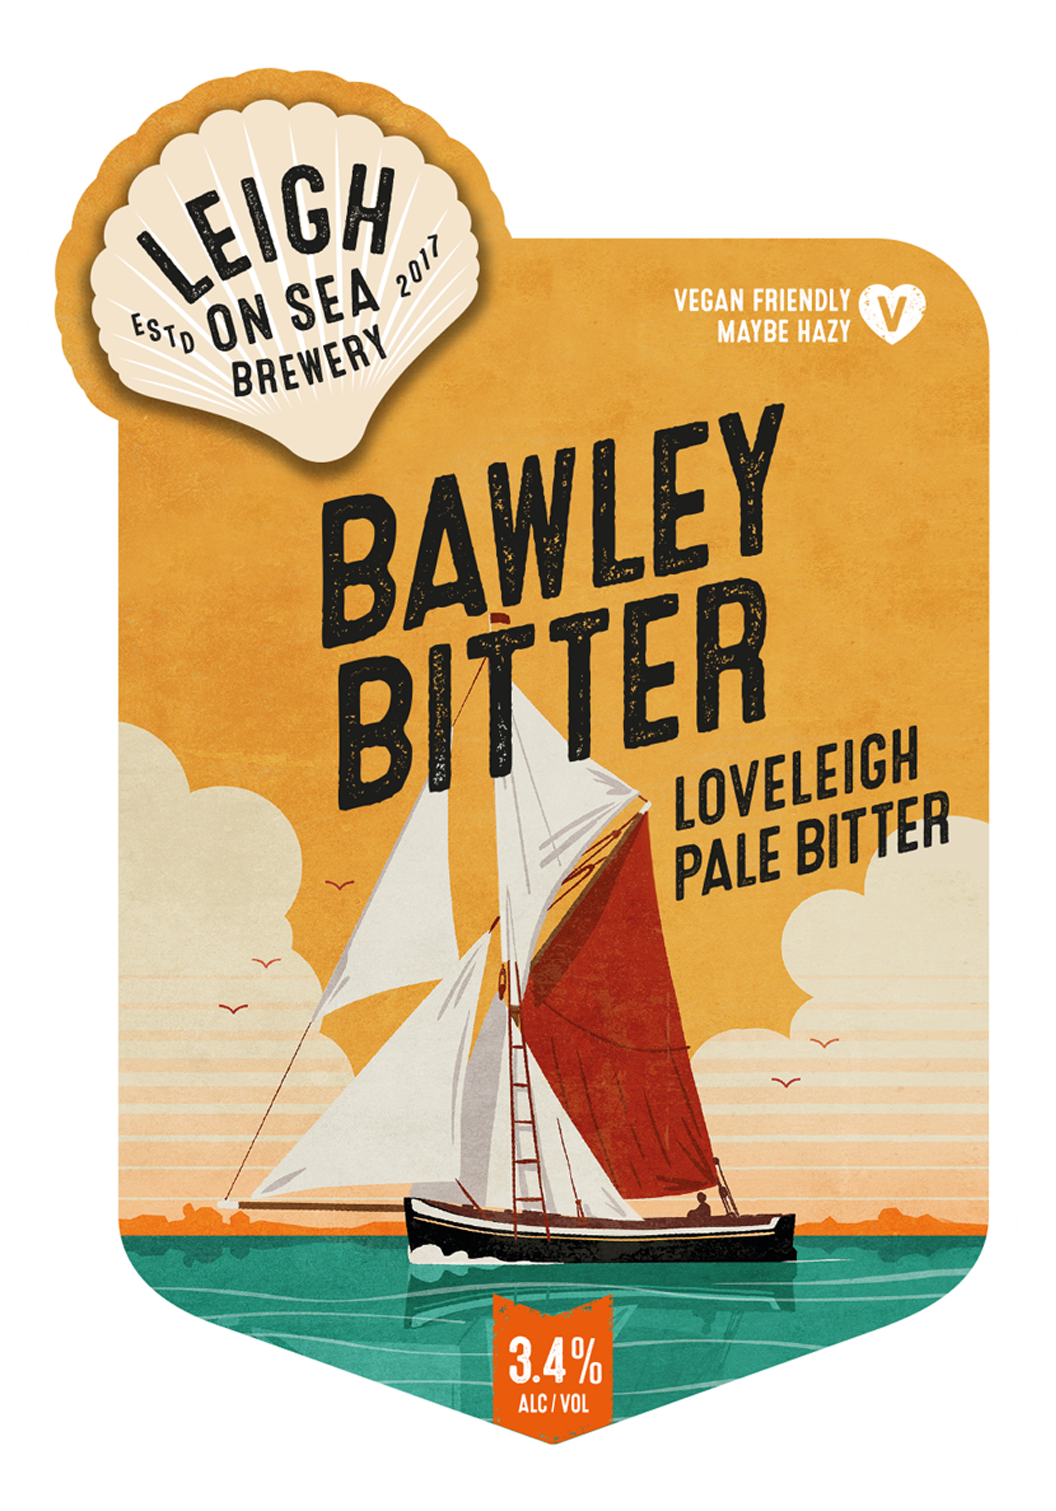 Bawley Bitter - Beer in Box